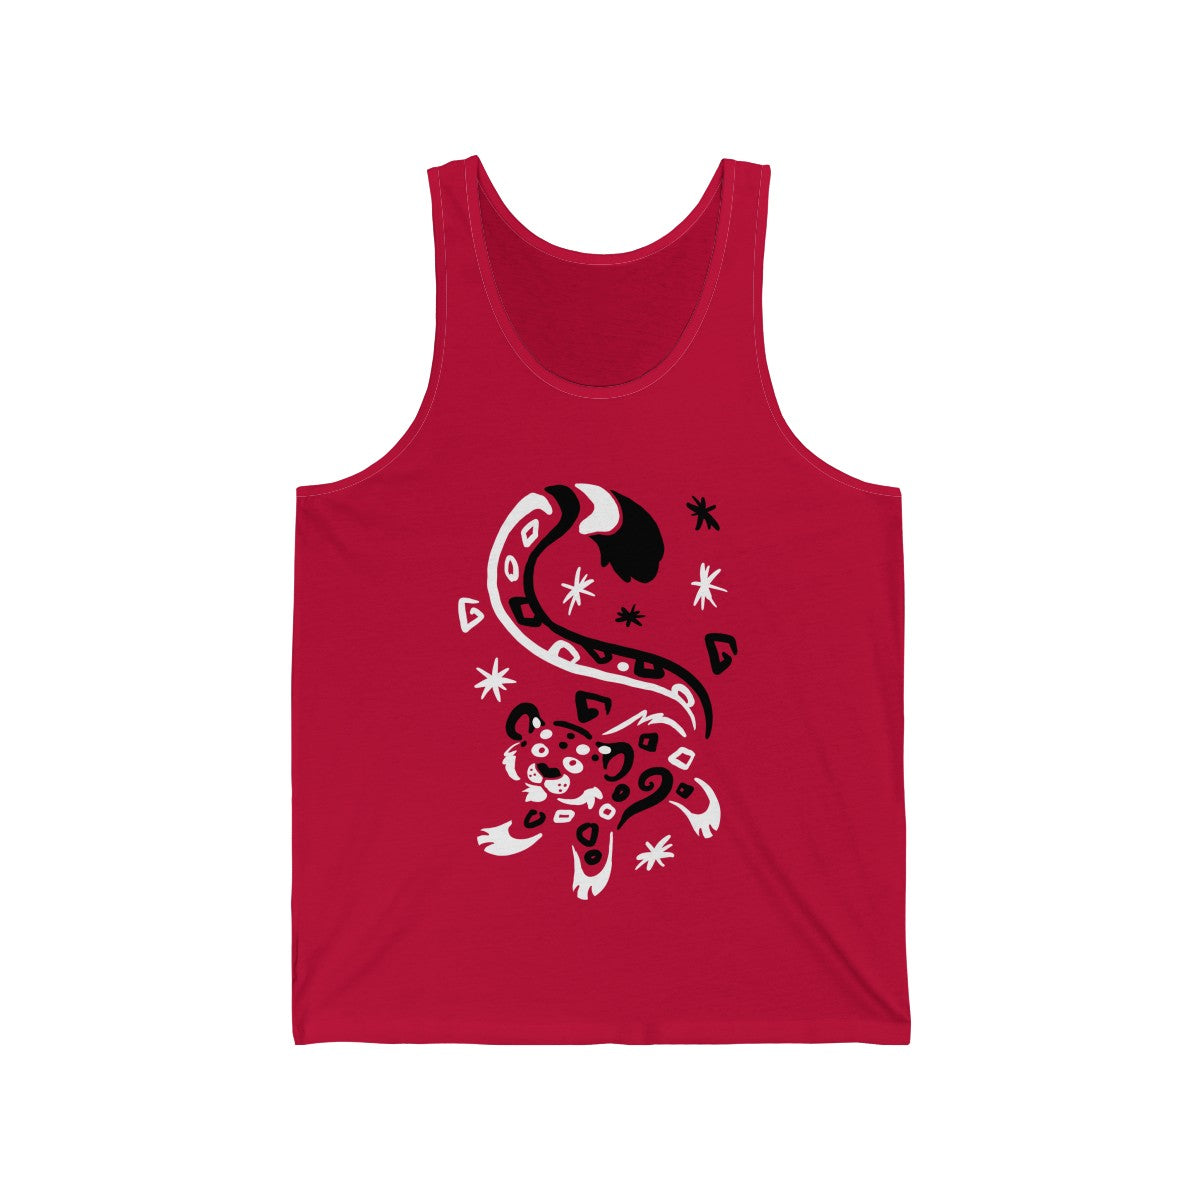 Sneps & Snow - Tank Top Tank Top Dire Creatures Red XS 